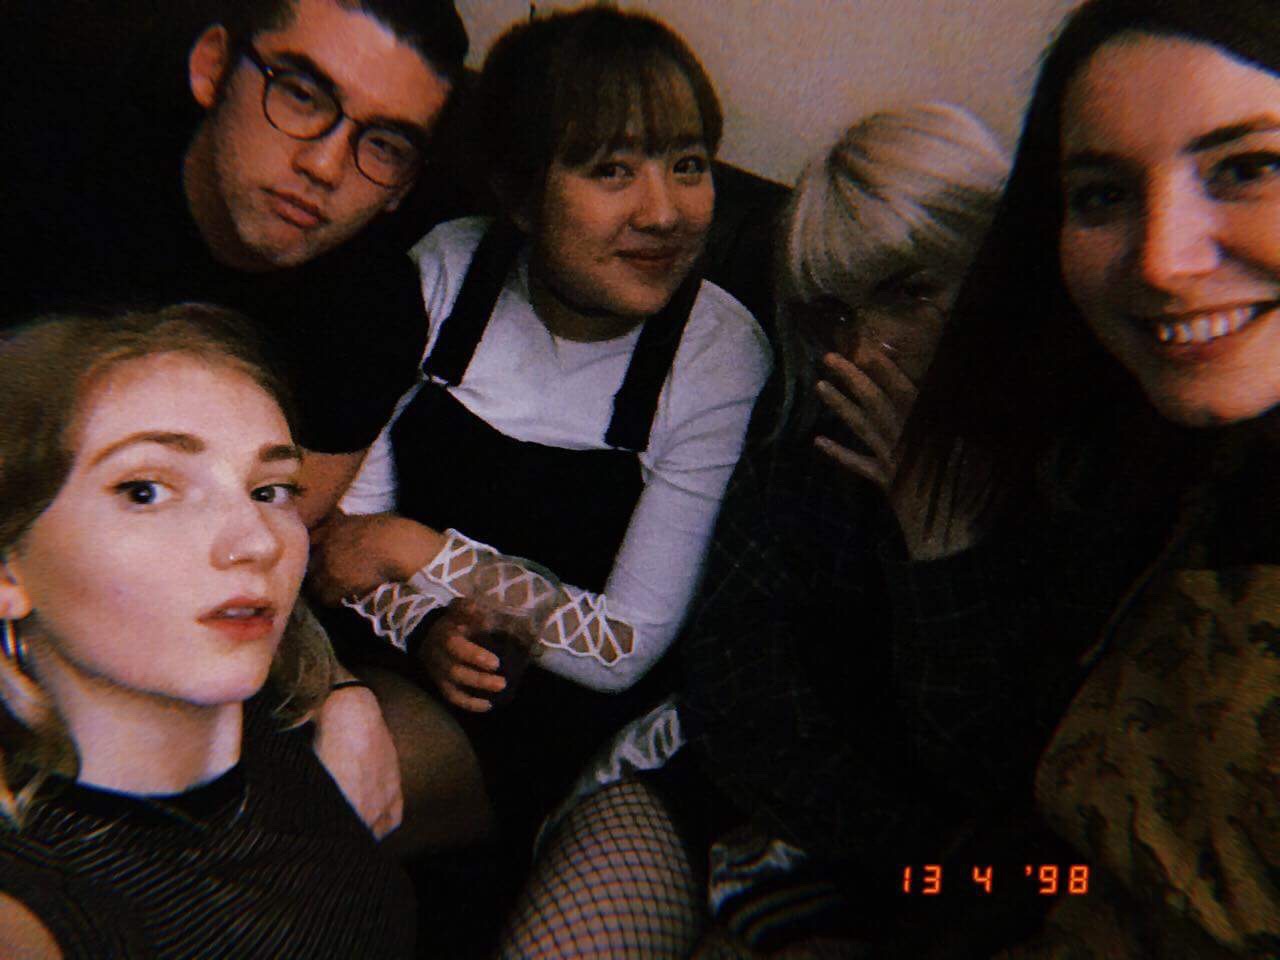 group photo at a house party